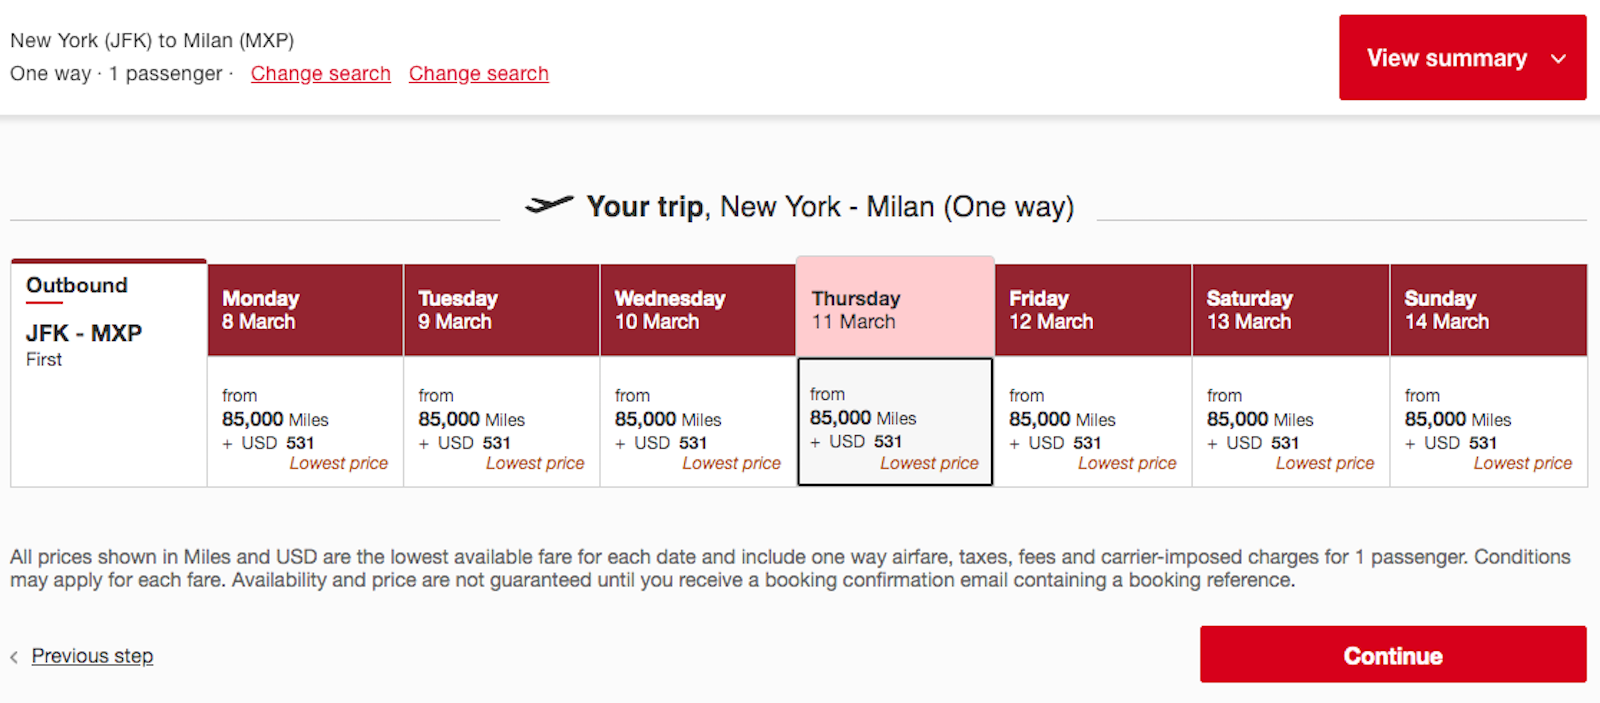 Emirates first class using Membership Rewards points to fly to Milan